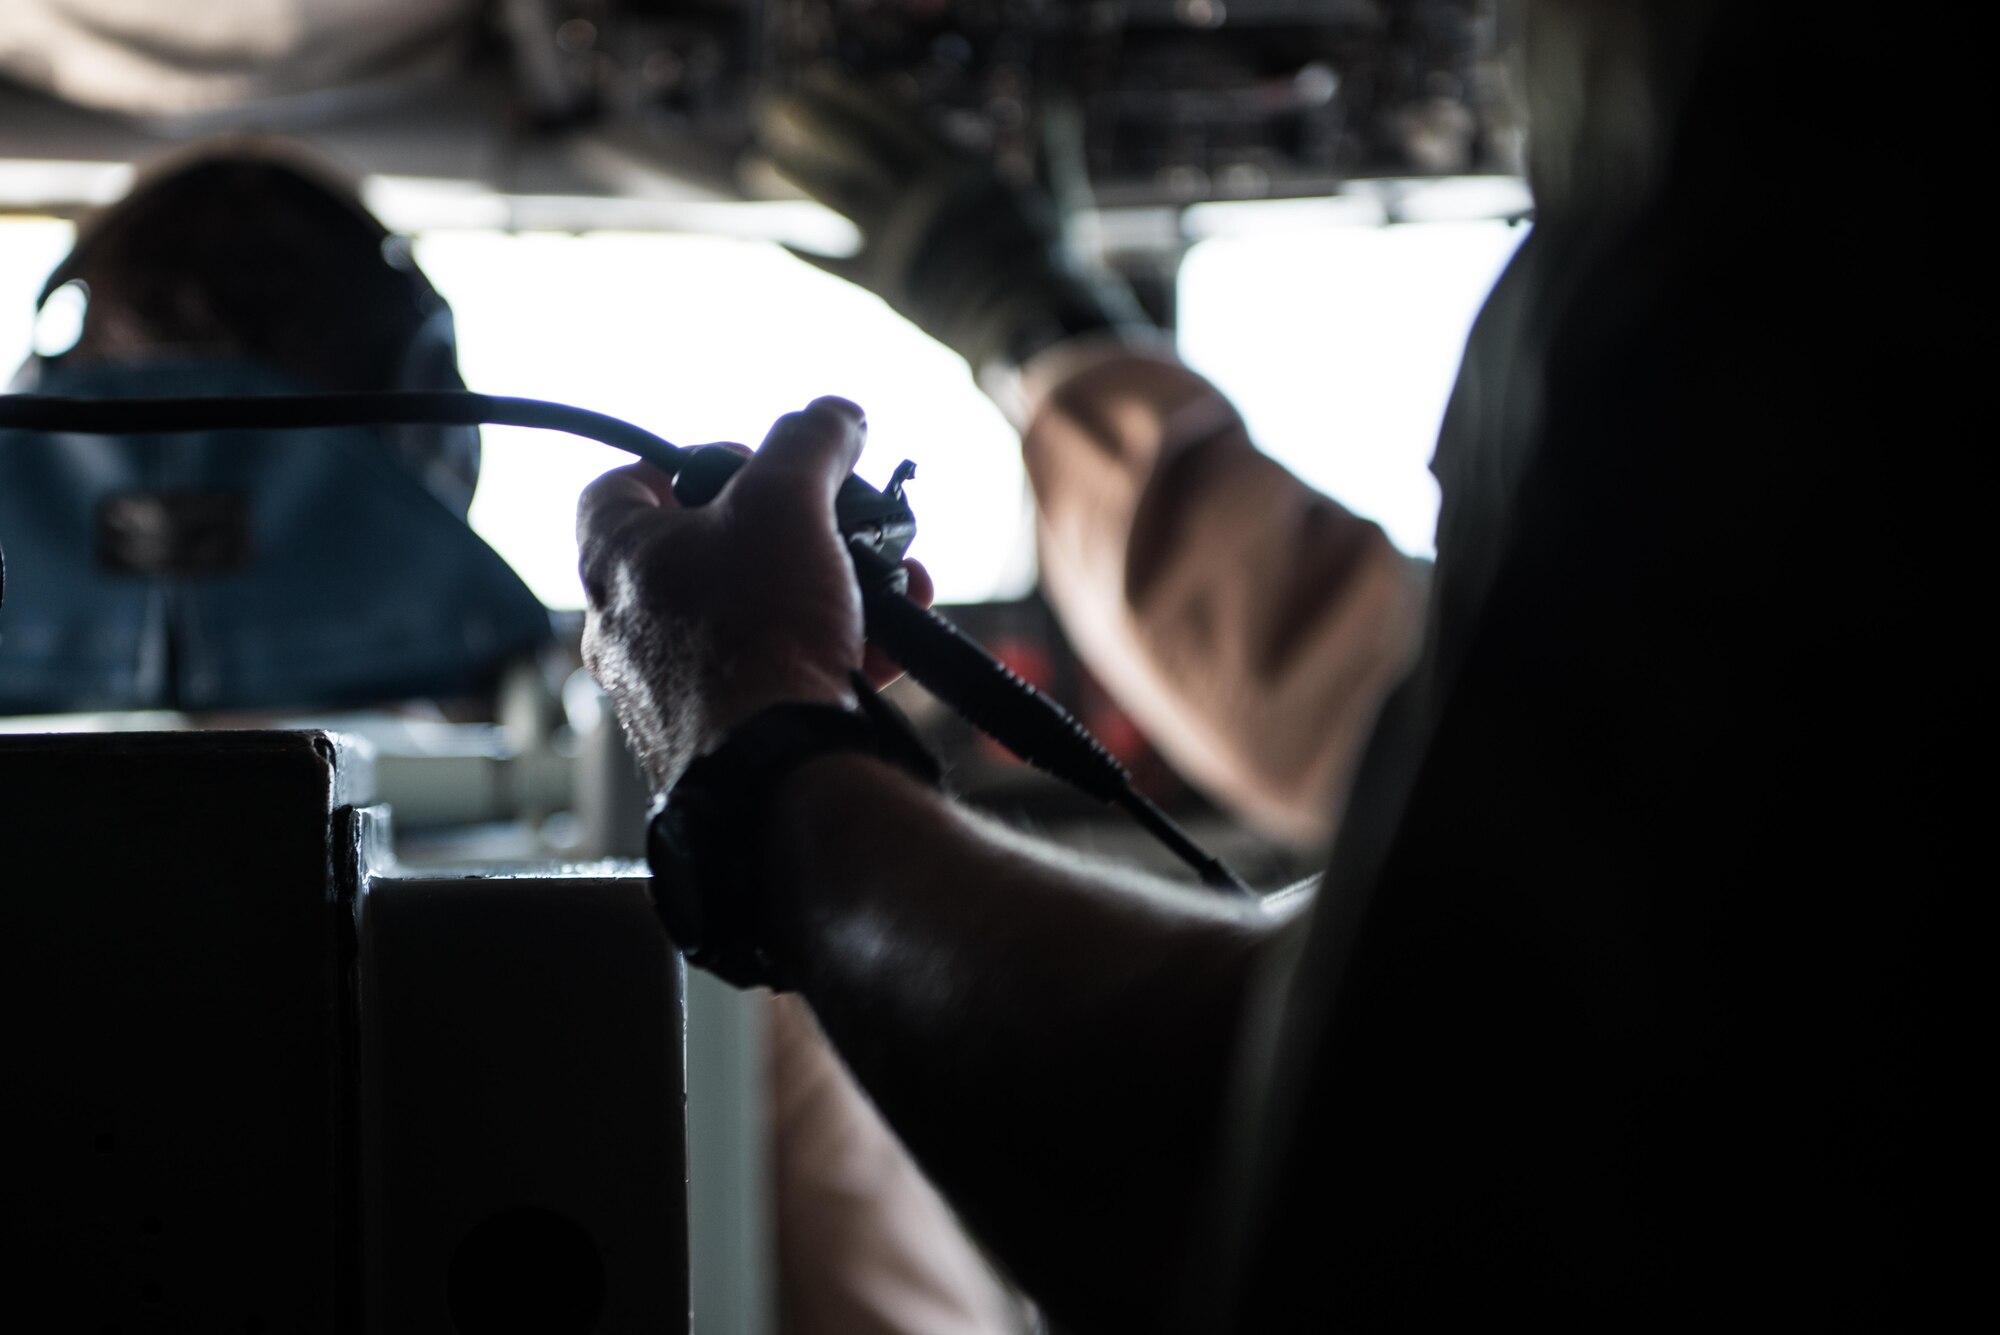 Senior Master Sgt.  Barry, 340th Expeditionary Air Refueling Squadron boom operator, communicates with the pilots of a KC-135 Stratotanker during pre-flight checklist completion September 16, 2015 at Al Udeid Air Base, Qatar. (U.S. Air Force photo/Staff Sgt. Alexandre Montes)